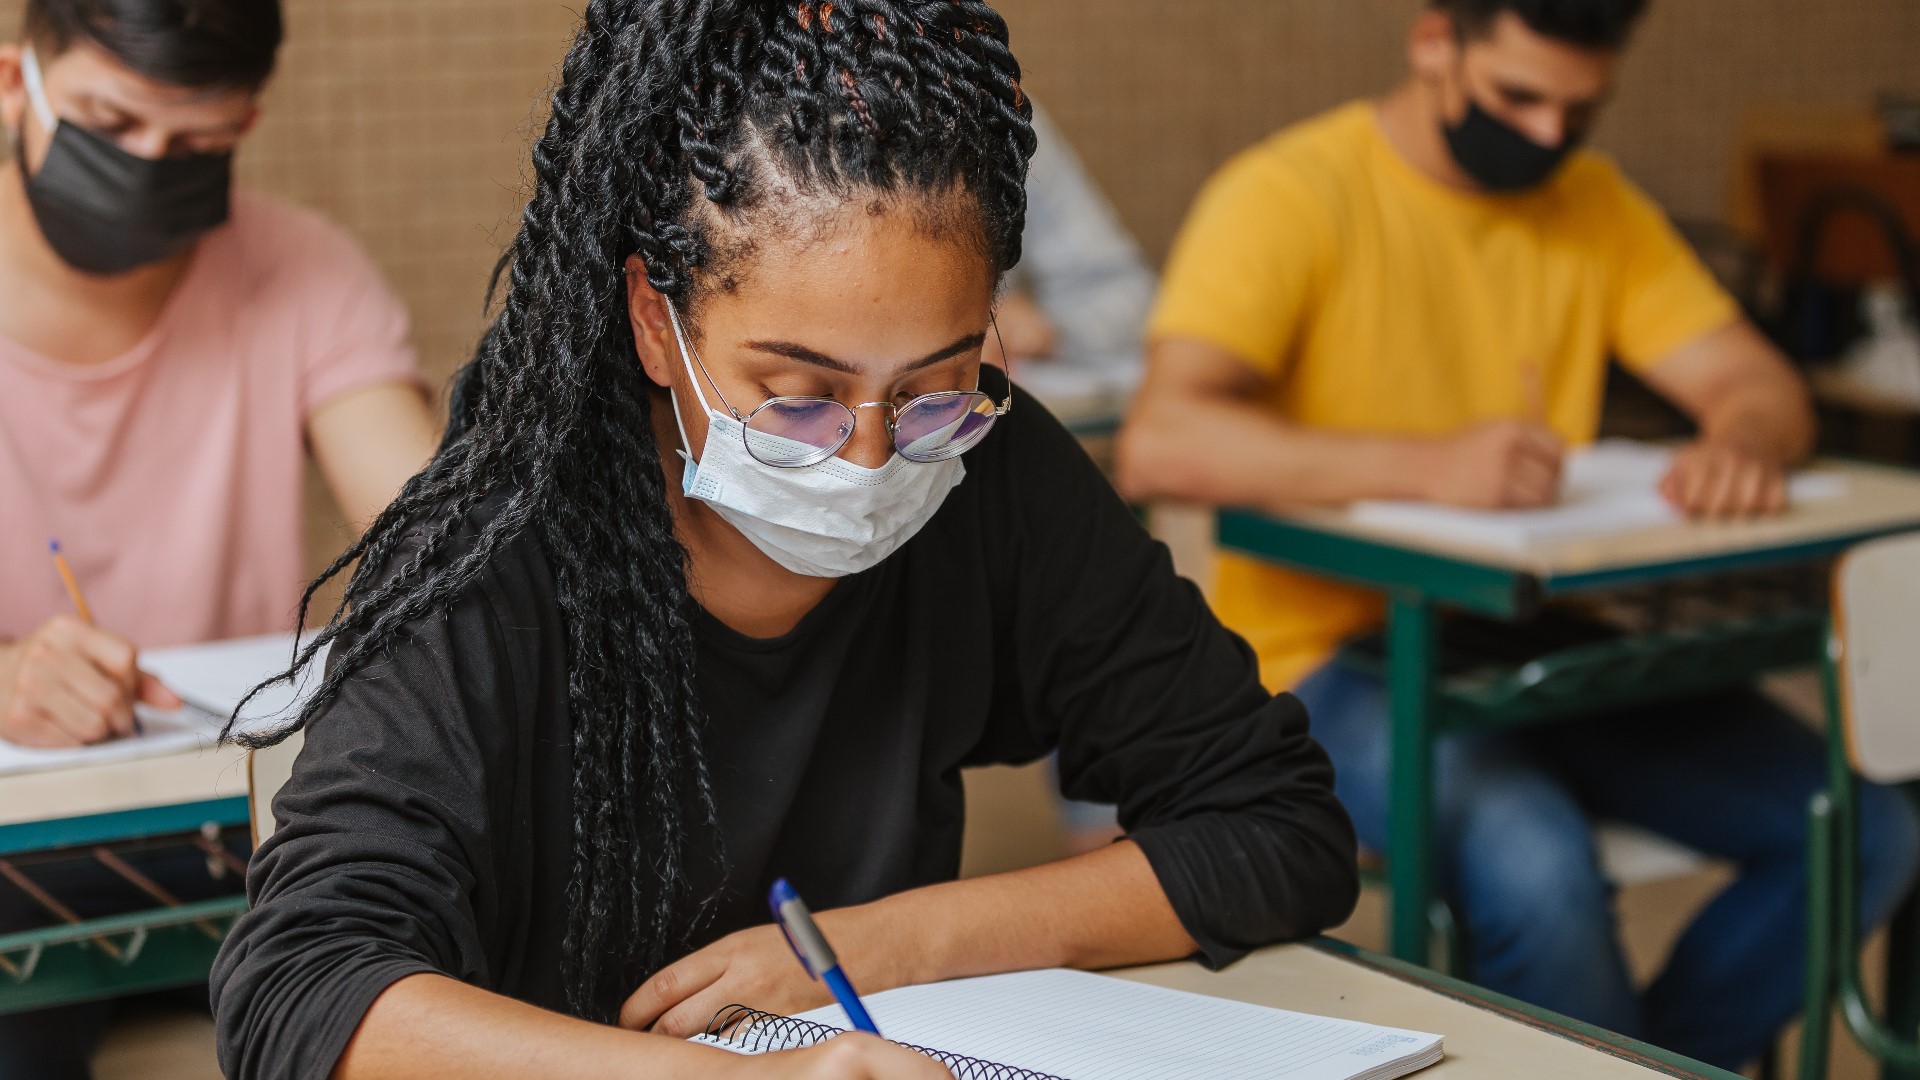 As students go back to school, a health expert shares how to make them feel more comfortable wearing masks.